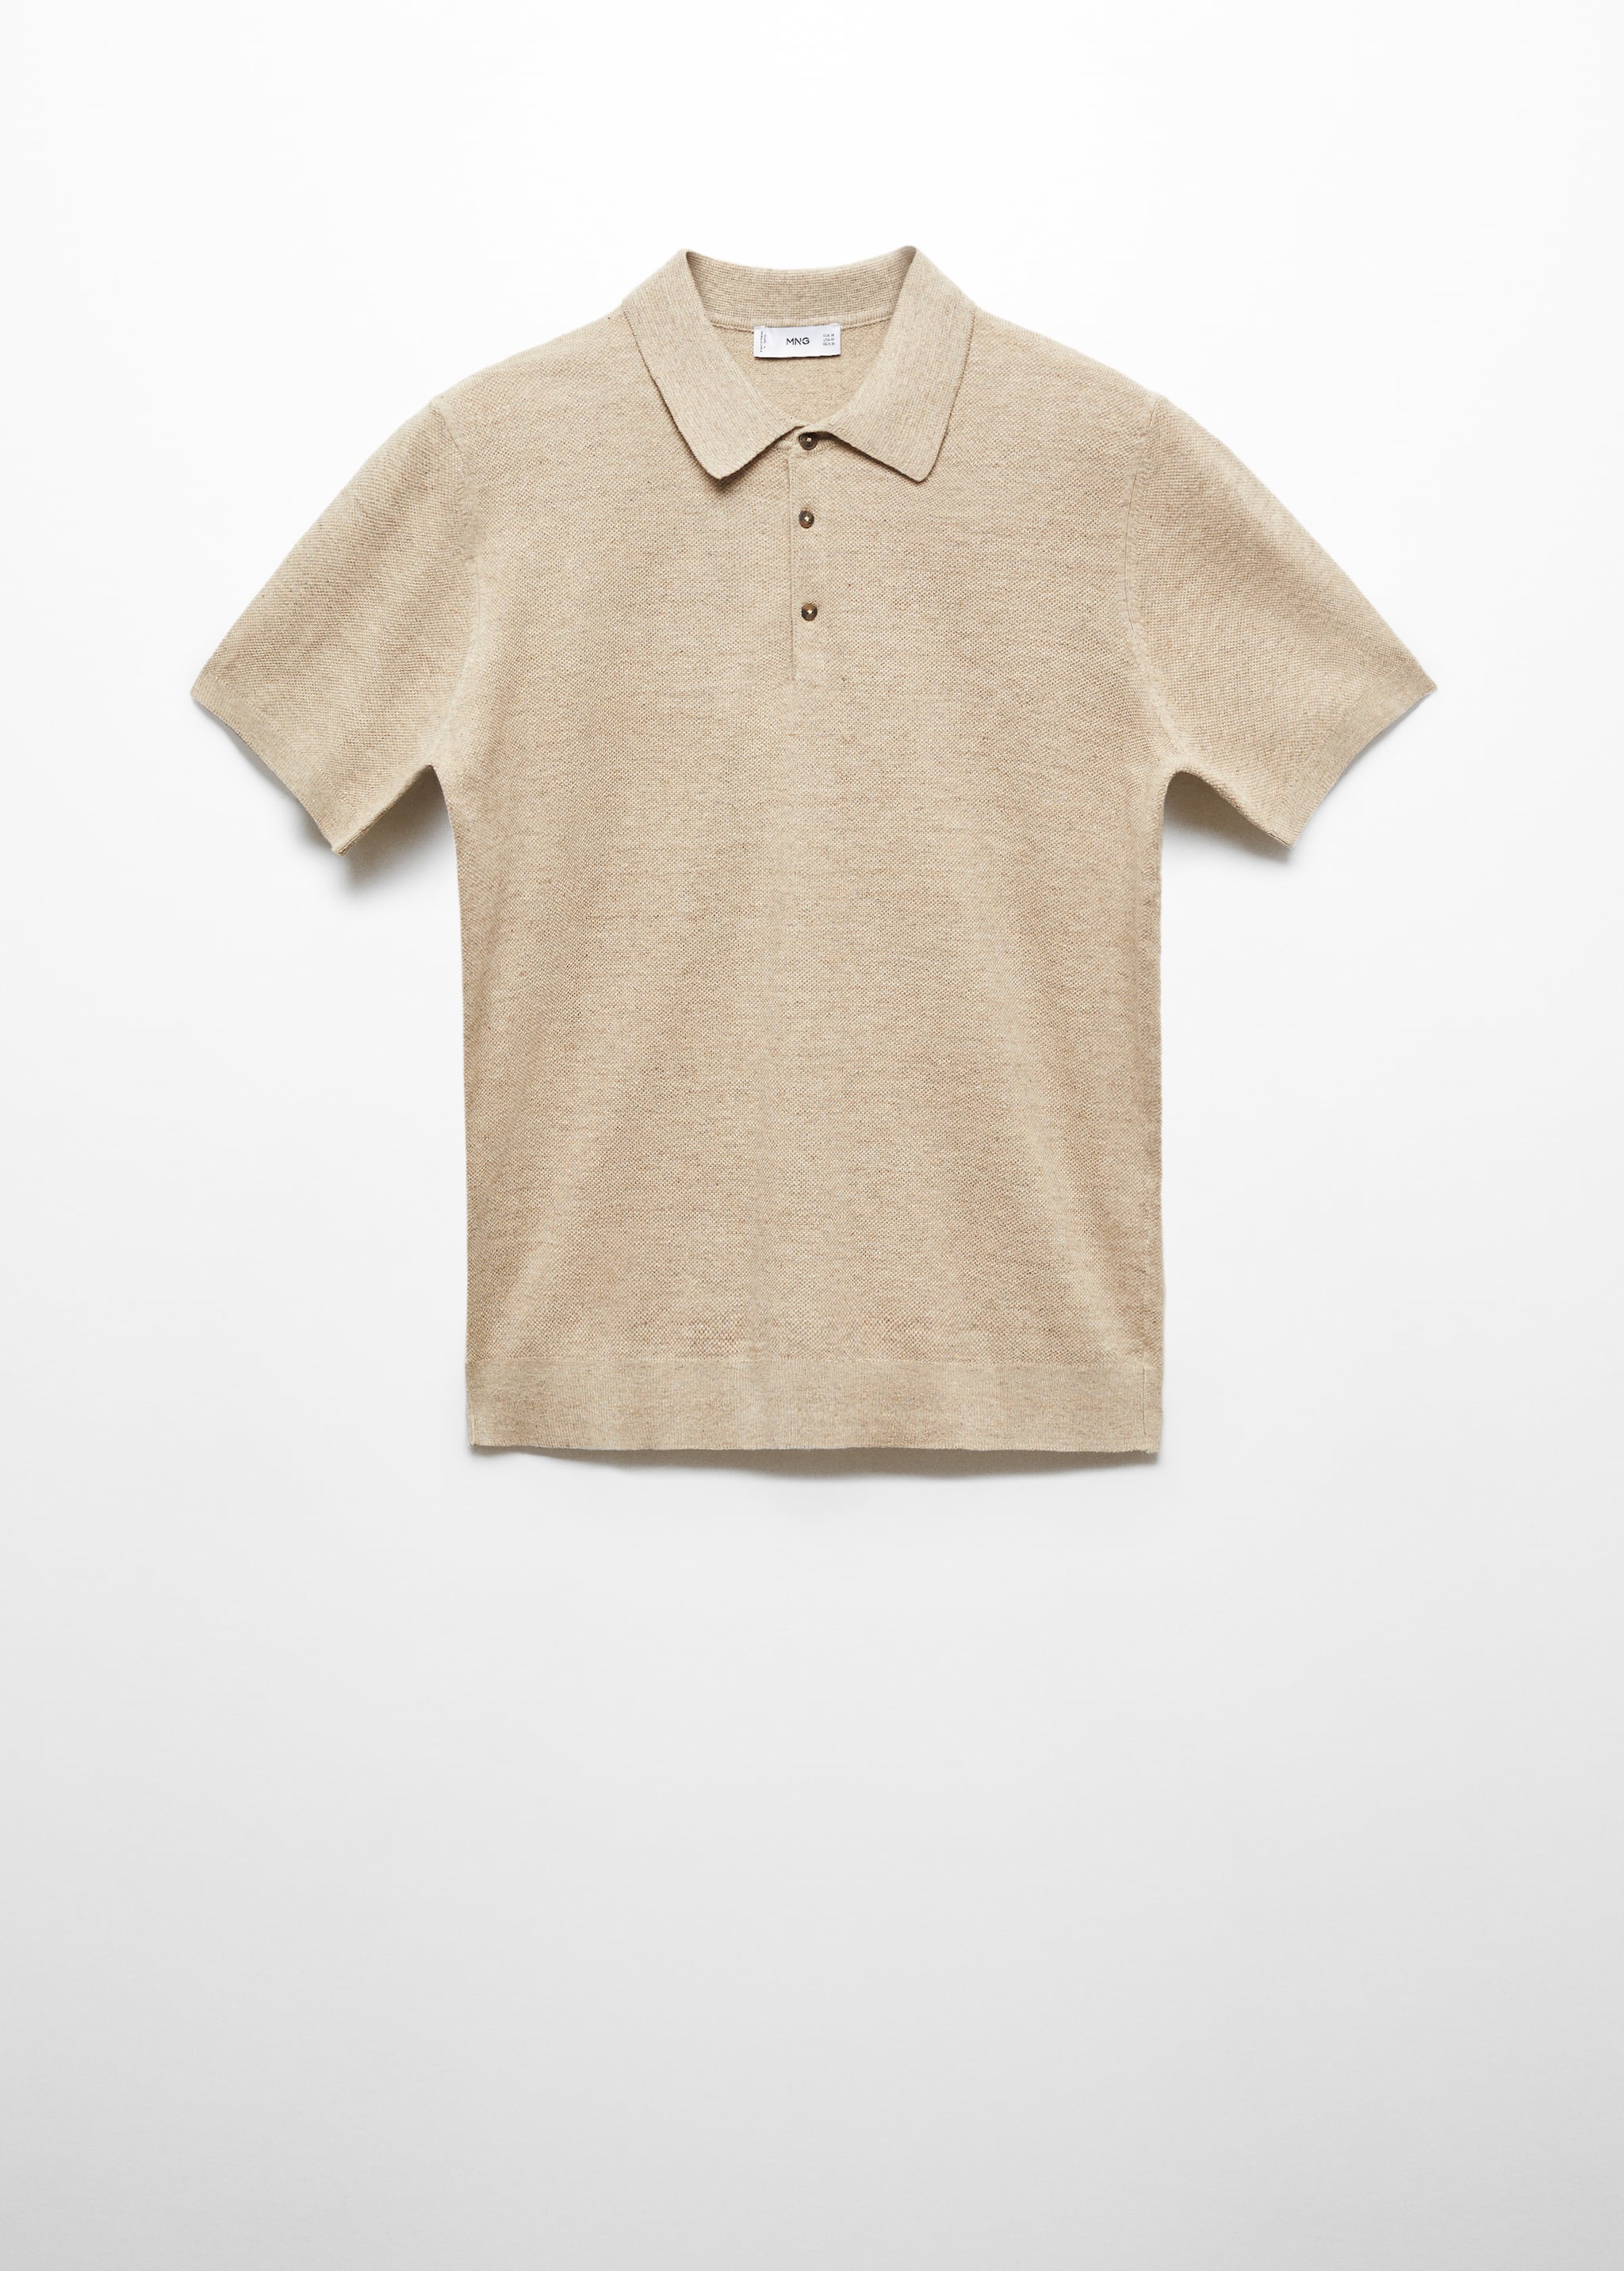 Short-sleeve knitted polo shirt - Article without model